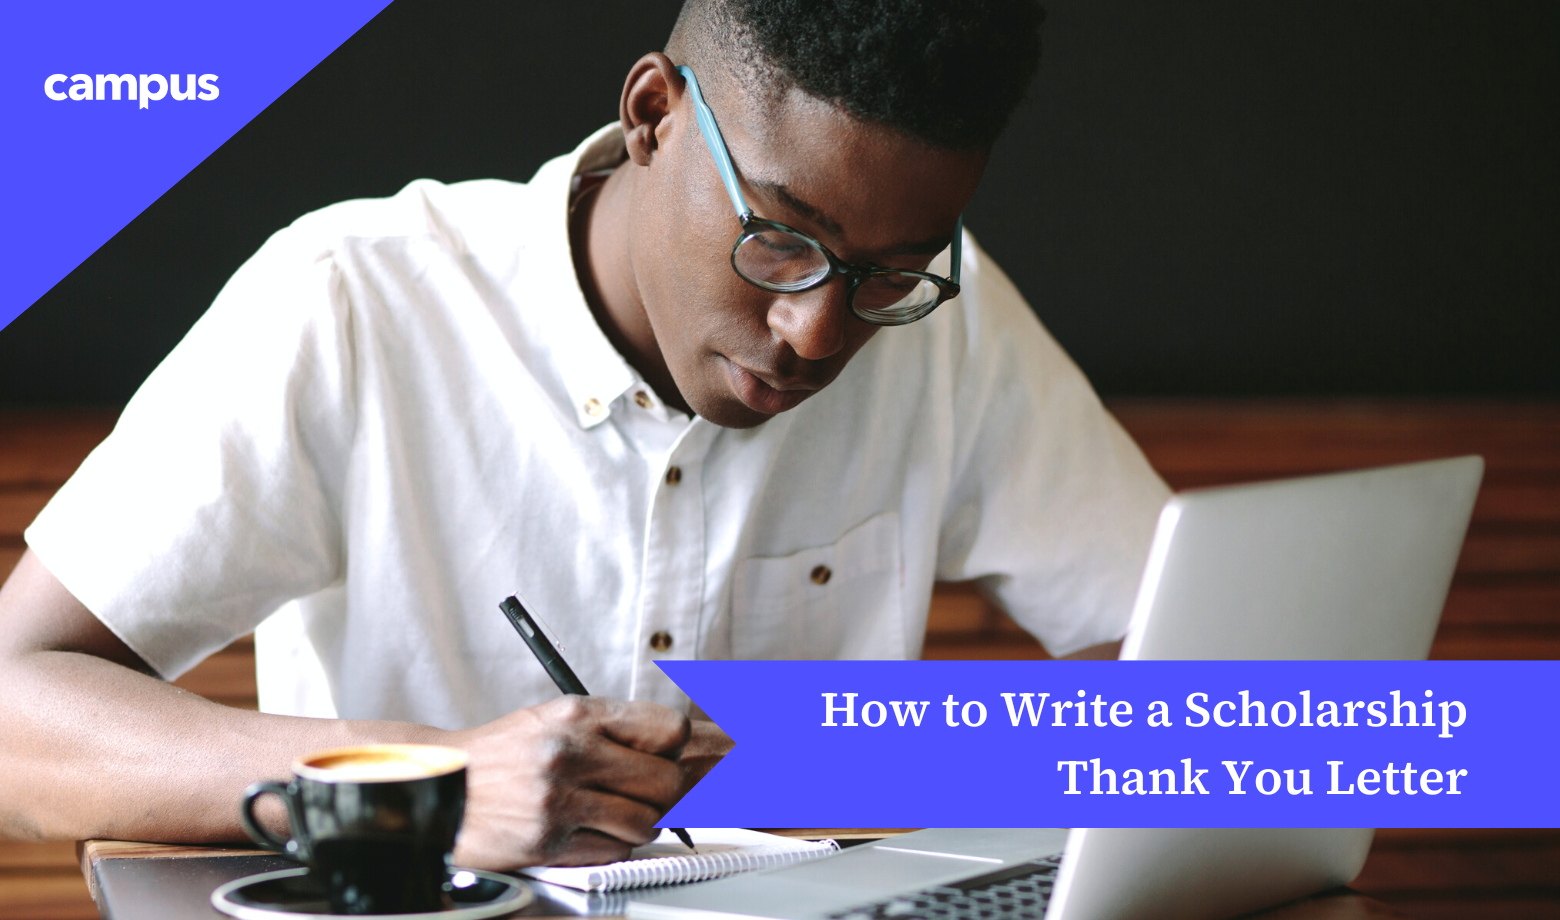 How to Write a Scholarship Thank You Letter